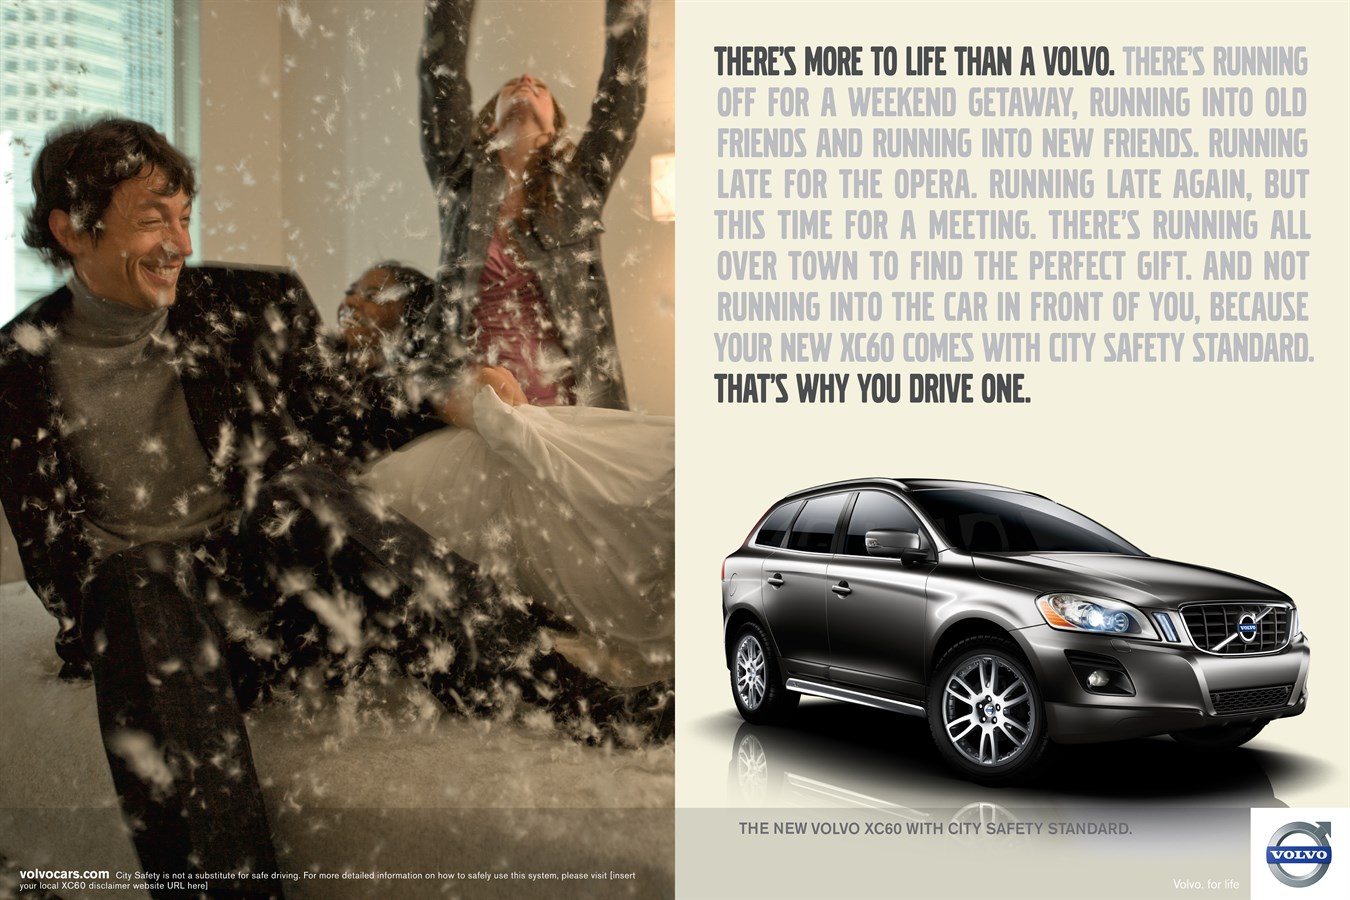 Campaign: There's more to life than a Volvo. That's why you drive one.